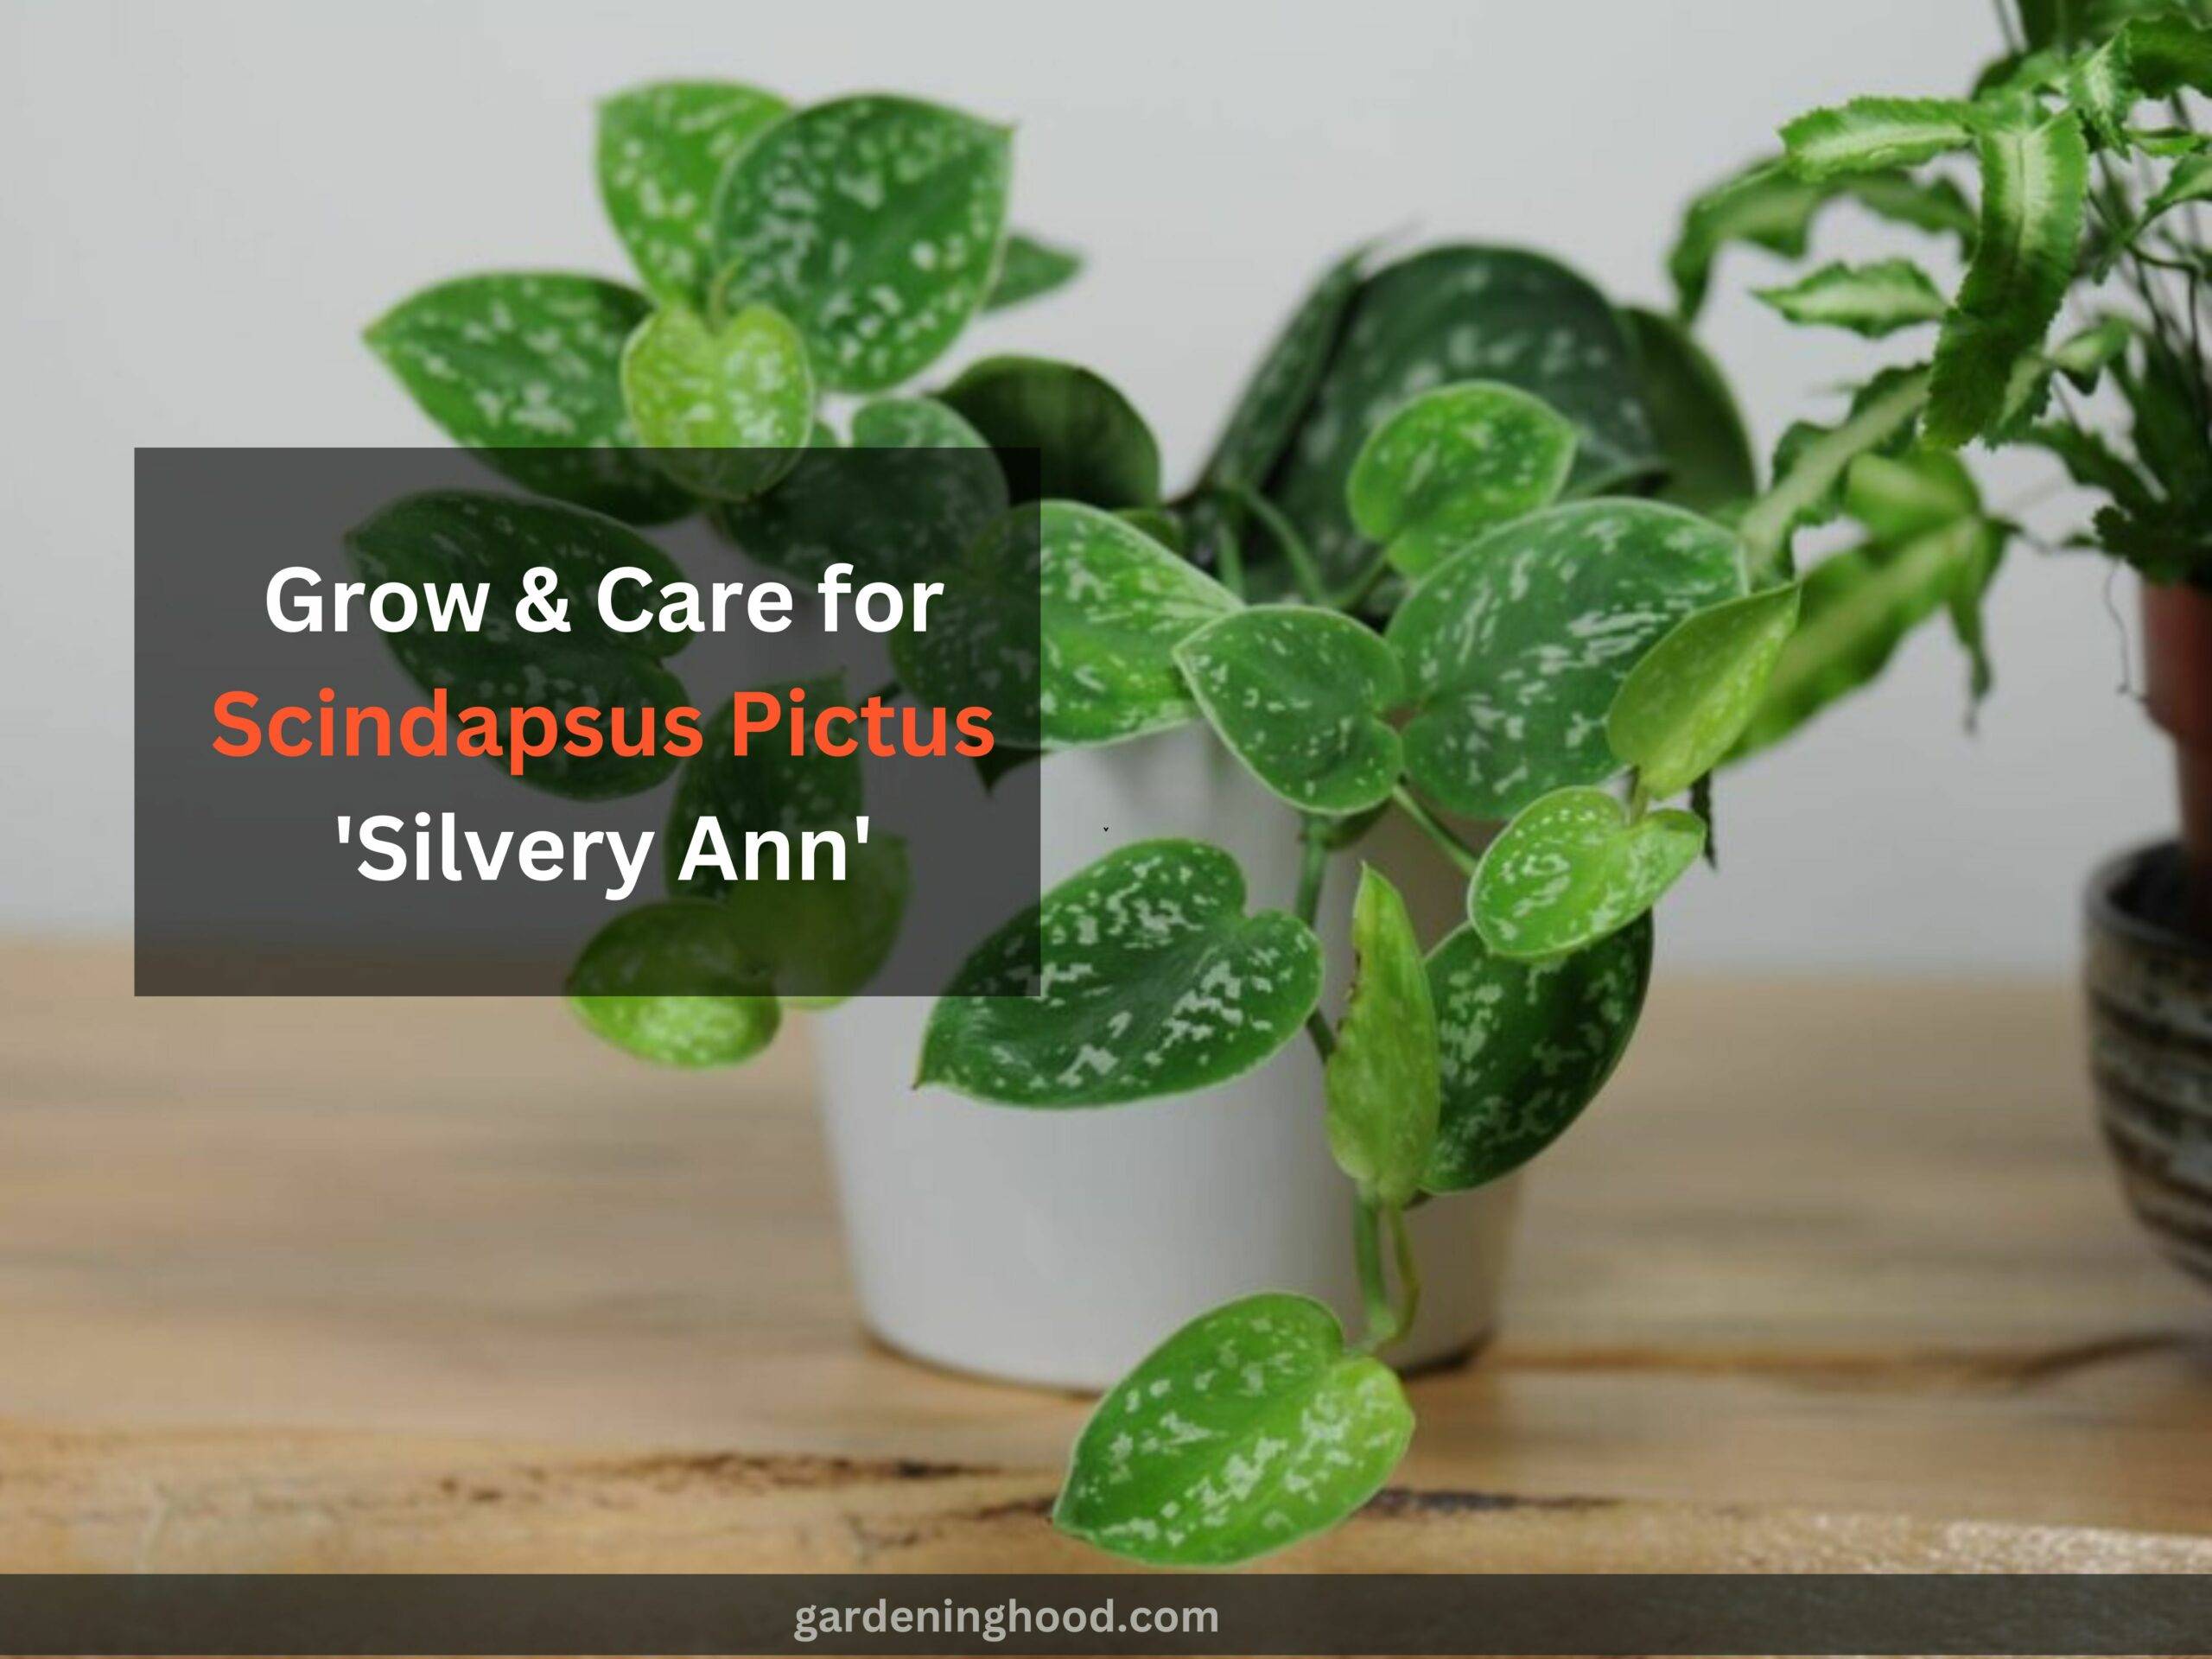 How to Grow & Care for Scindapsus Pictus 'Silvery Ann' (2023)